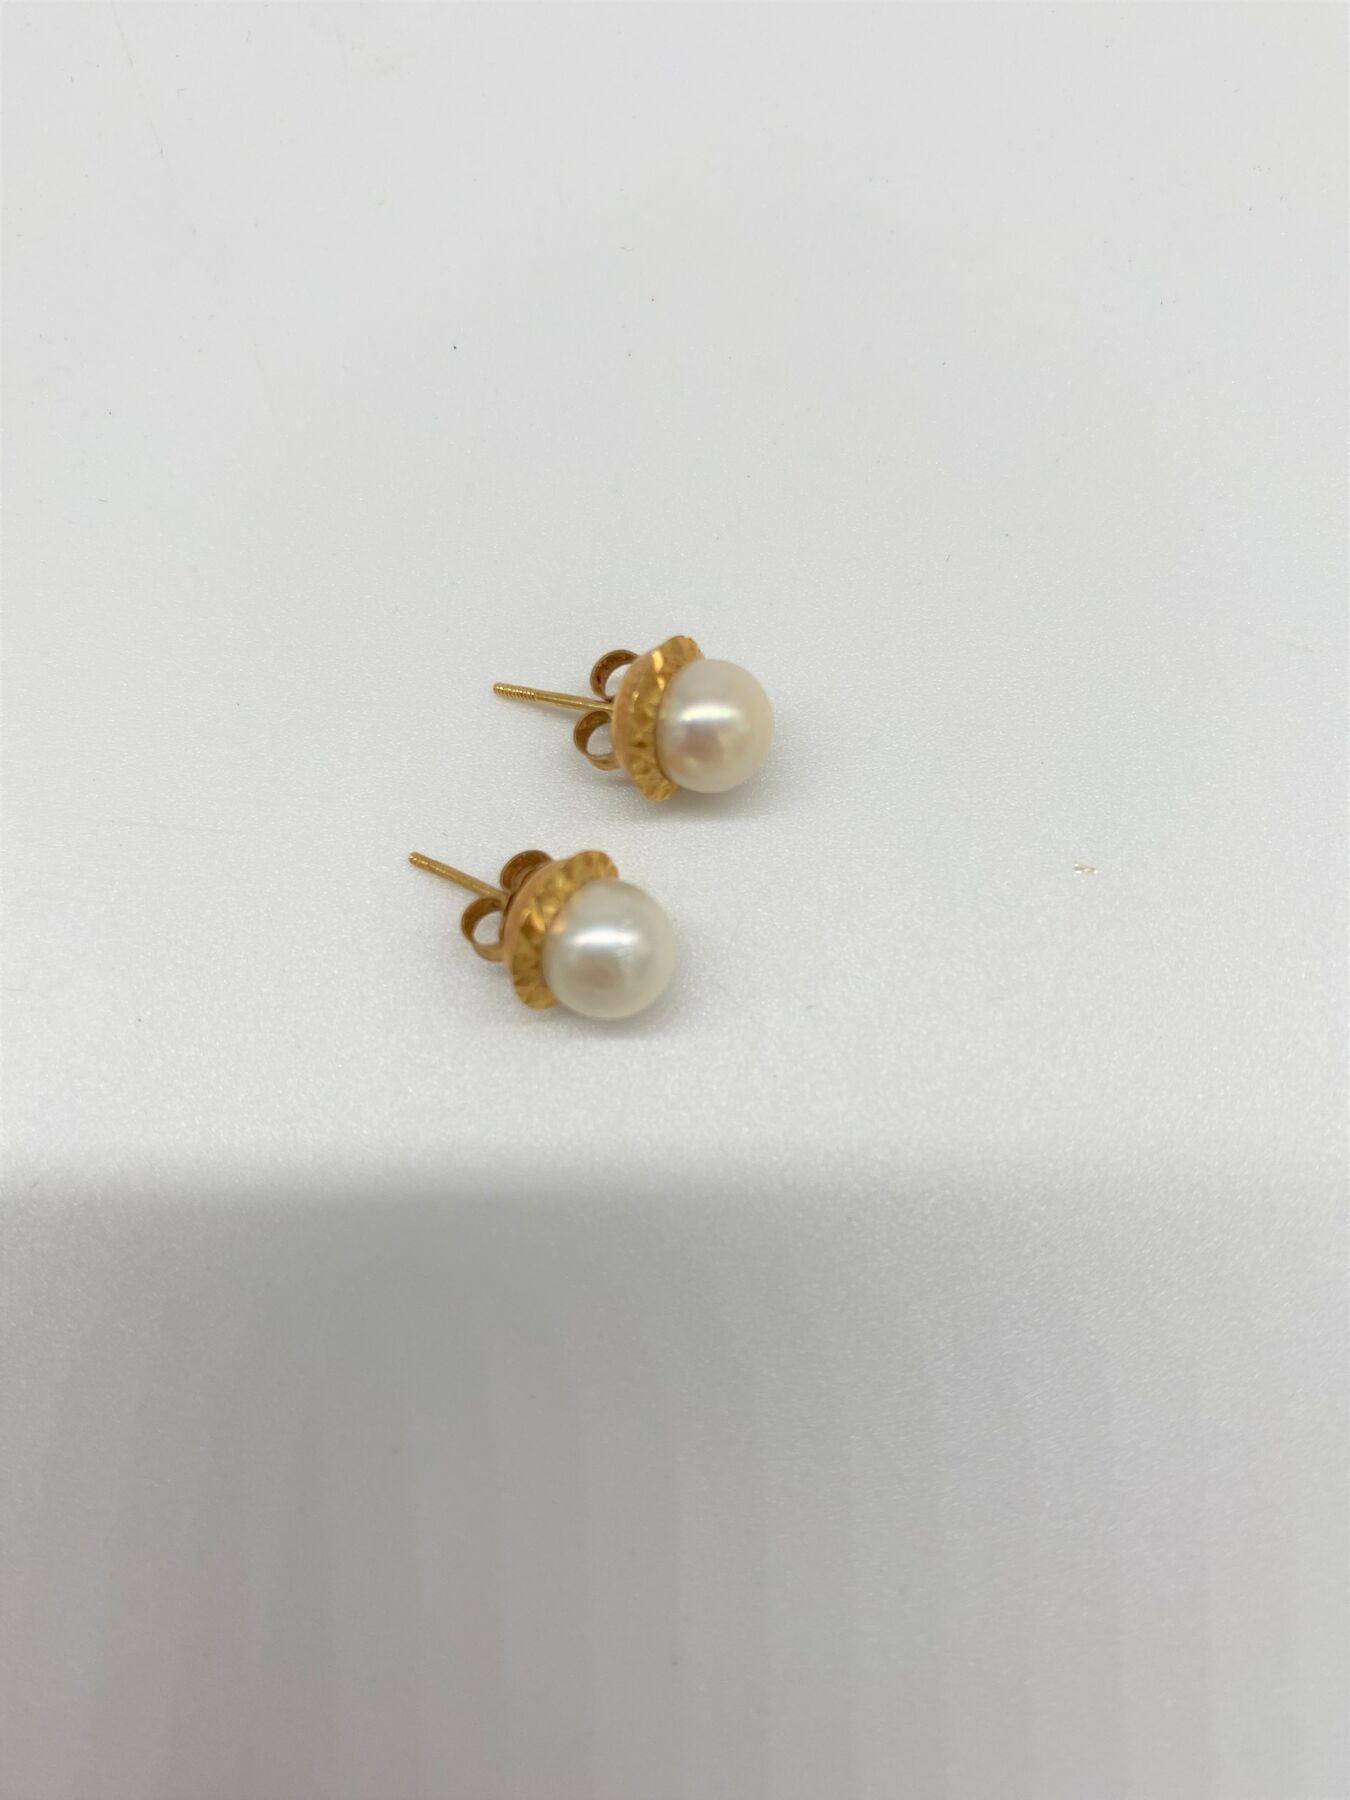 Null PAIR OF EARRINGS in yellow gold 750/1000 decorated with pearls. 1.75gr